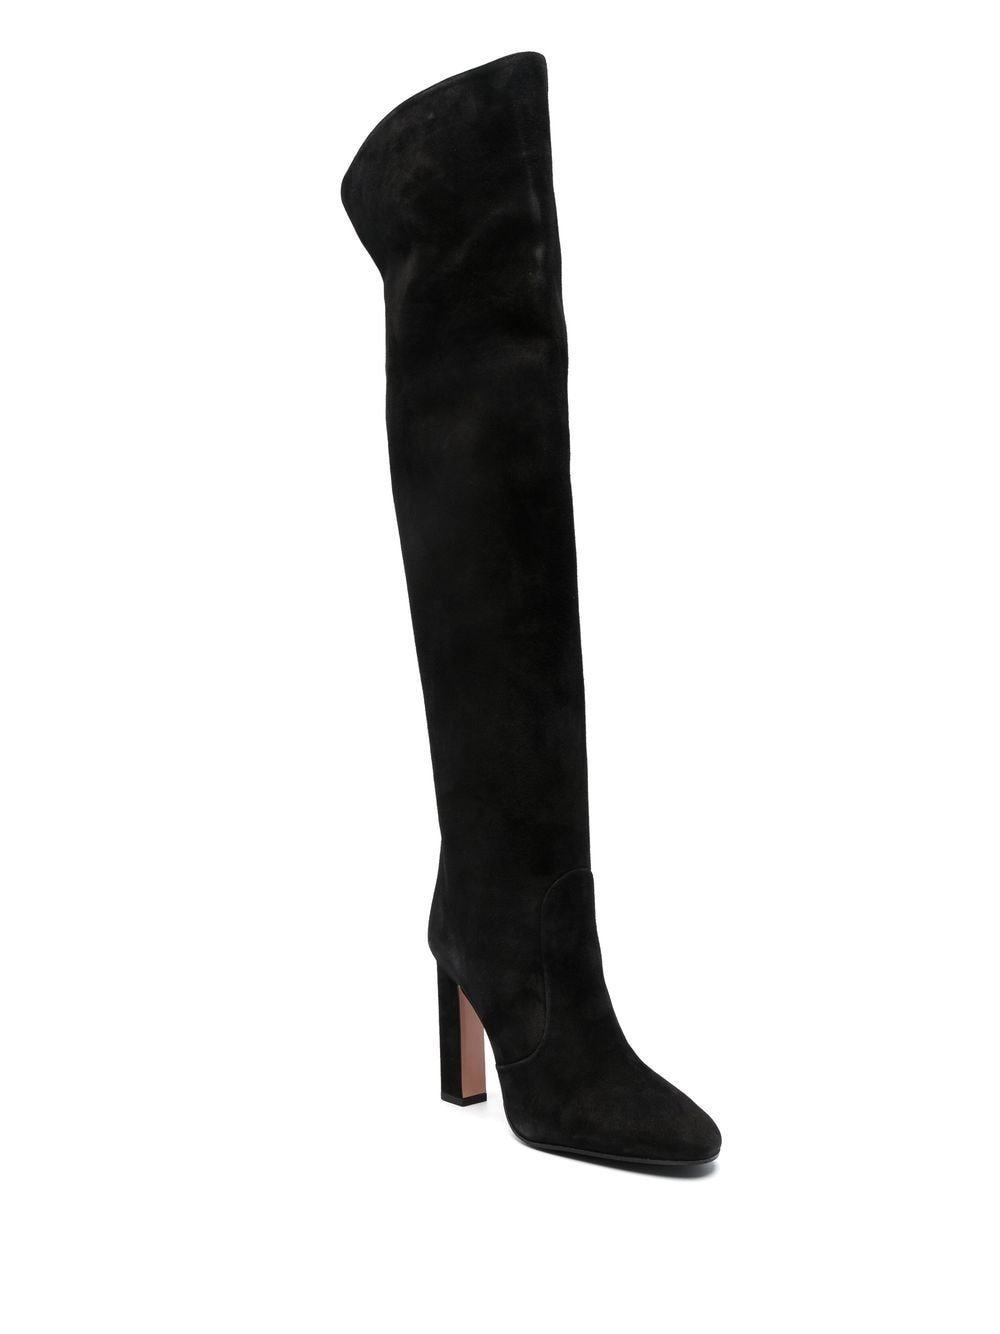 130mm knee-high suede boots - 2